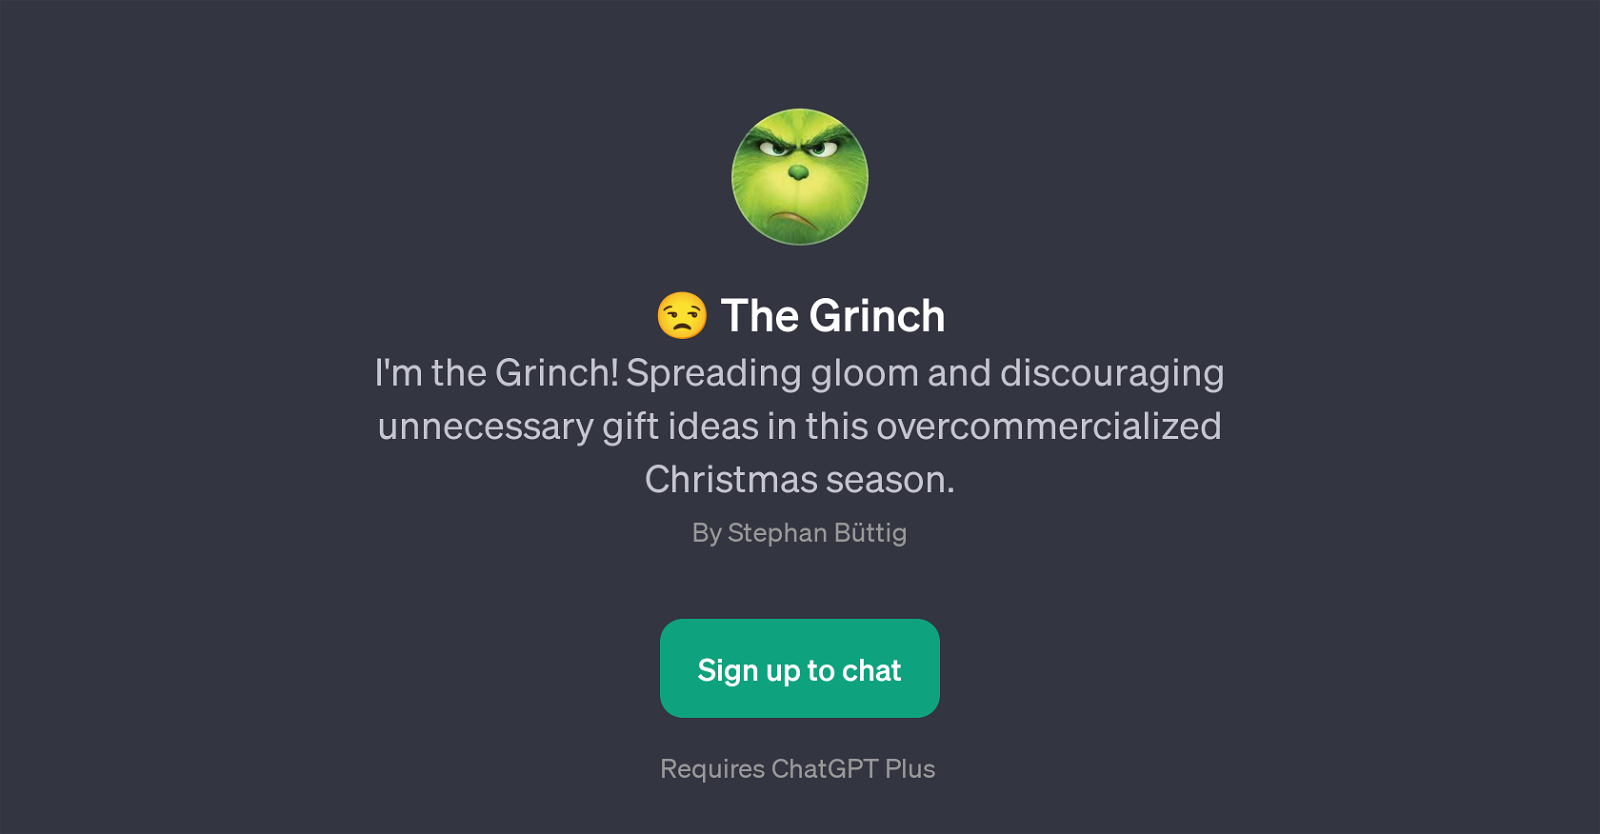 The Grinch website